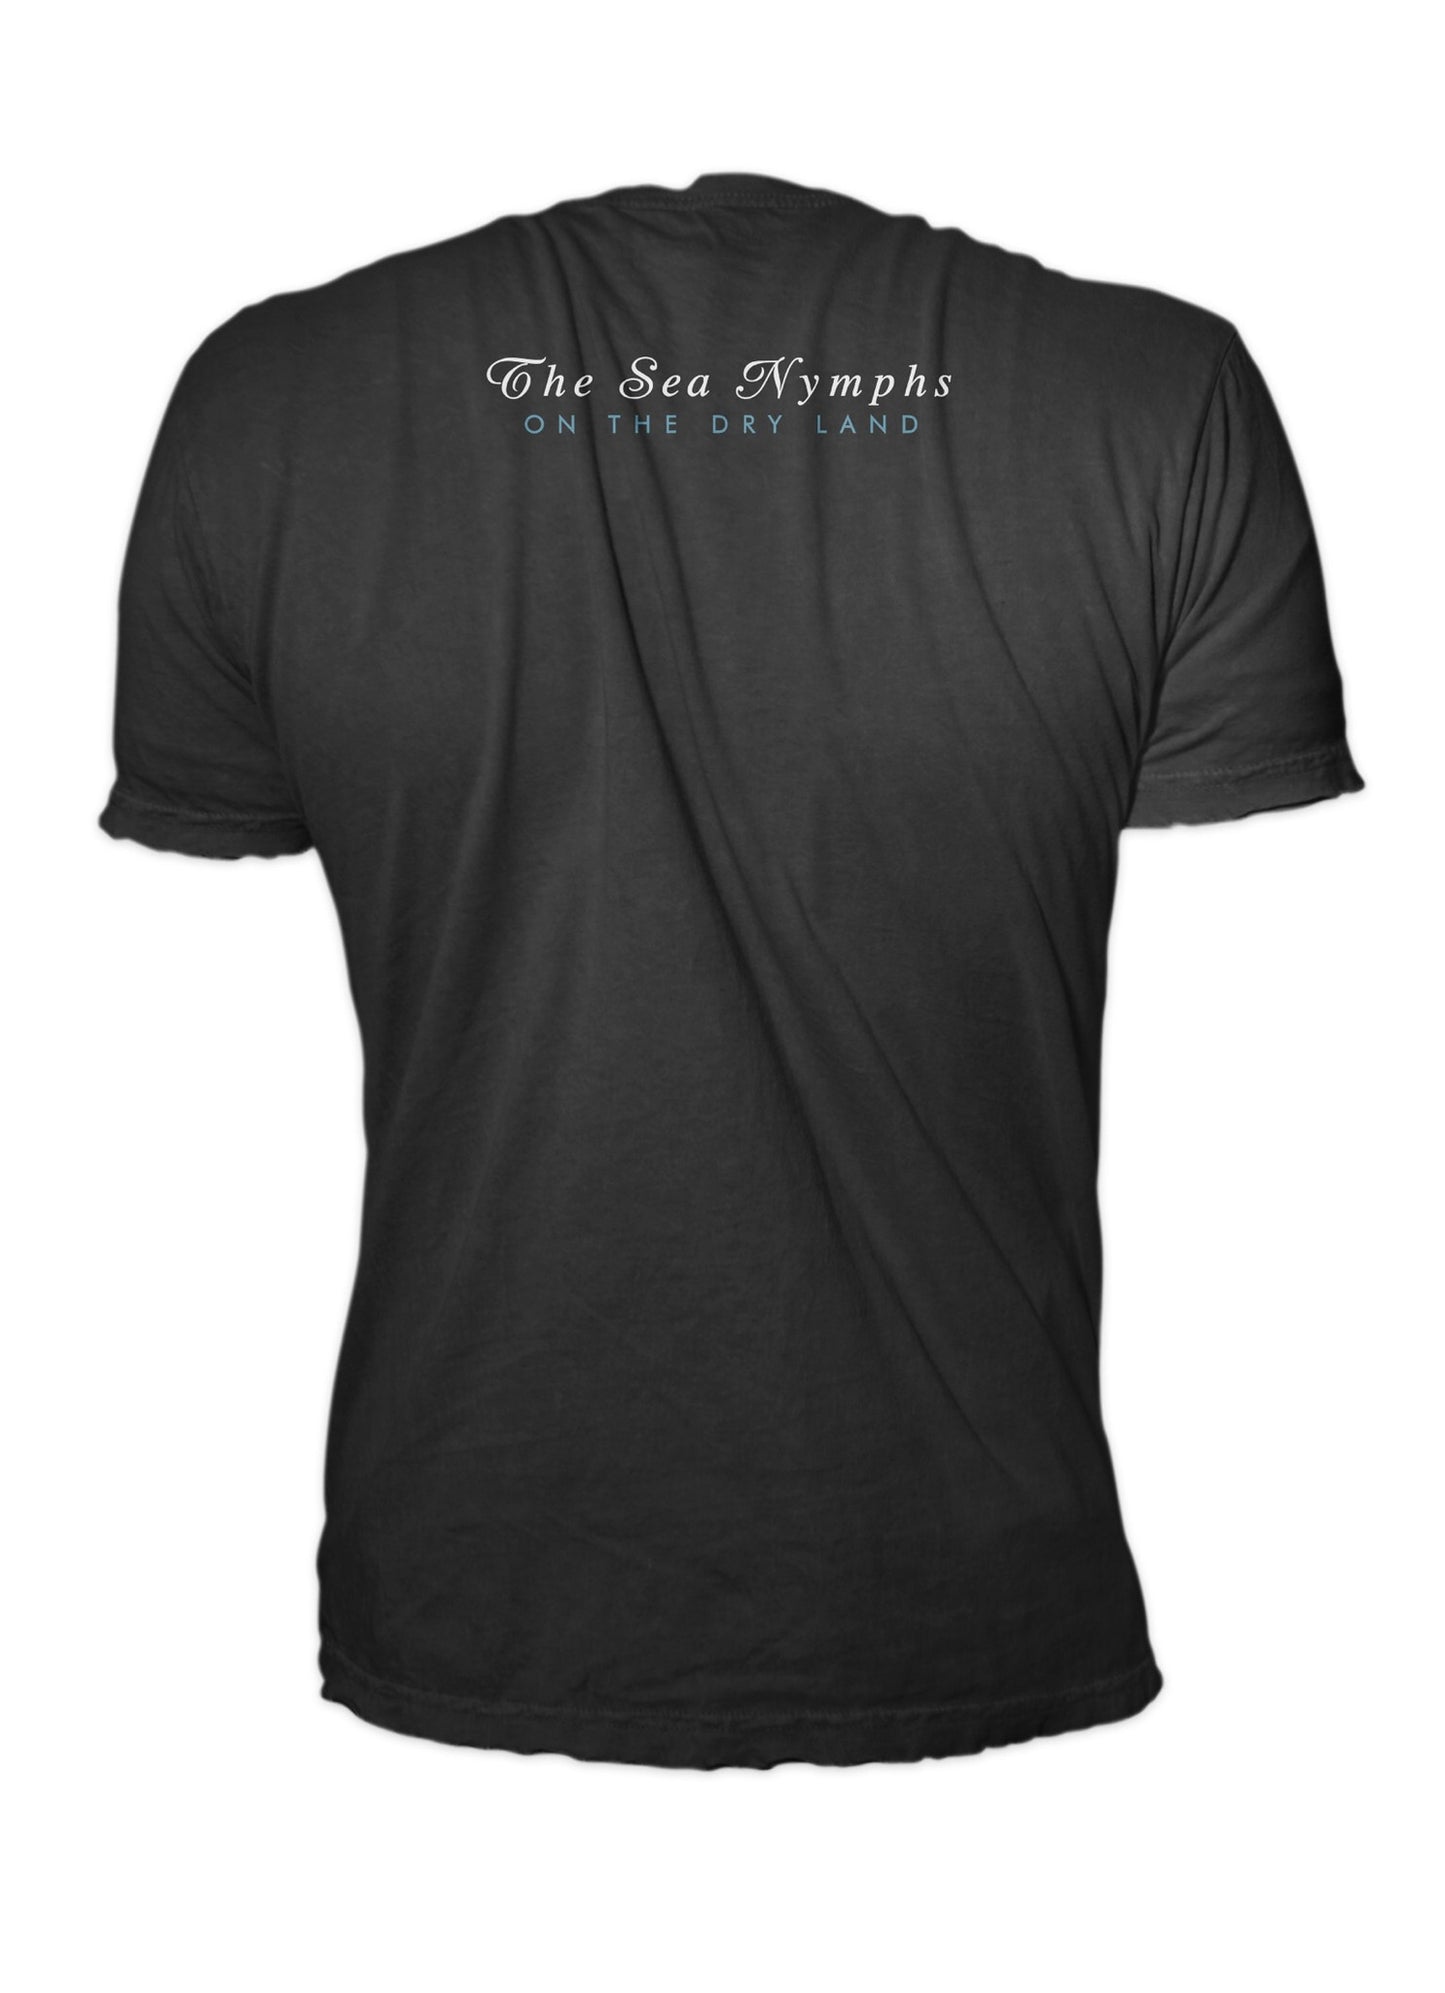 The Sea Nymphs, On The Dry Land T-shirt, black